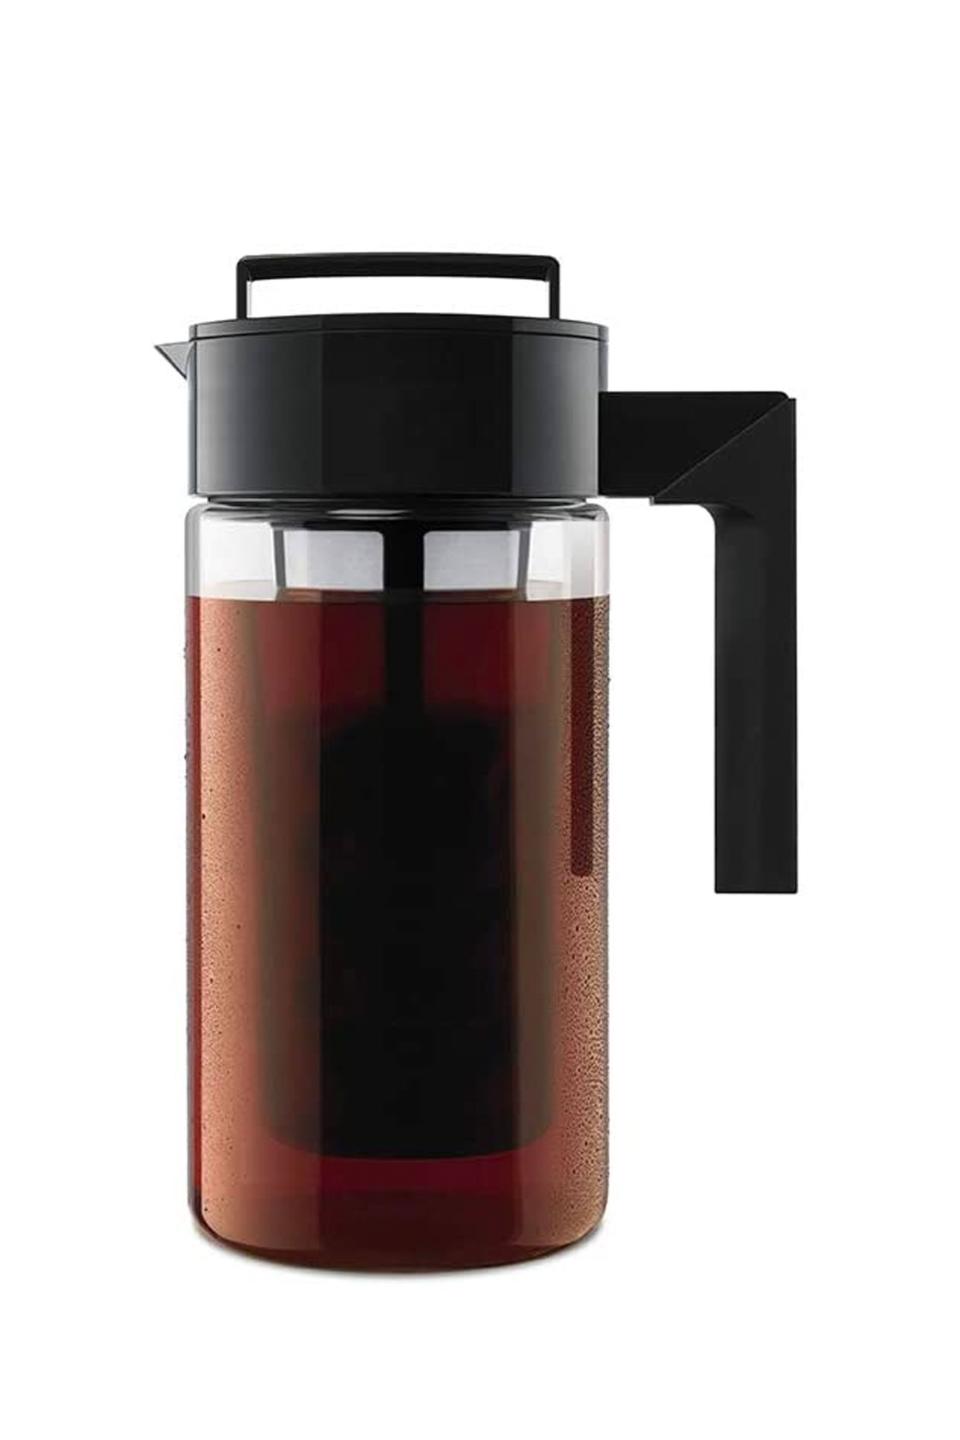 1) Takeya Deluxe Cold Brew Coffee Maker